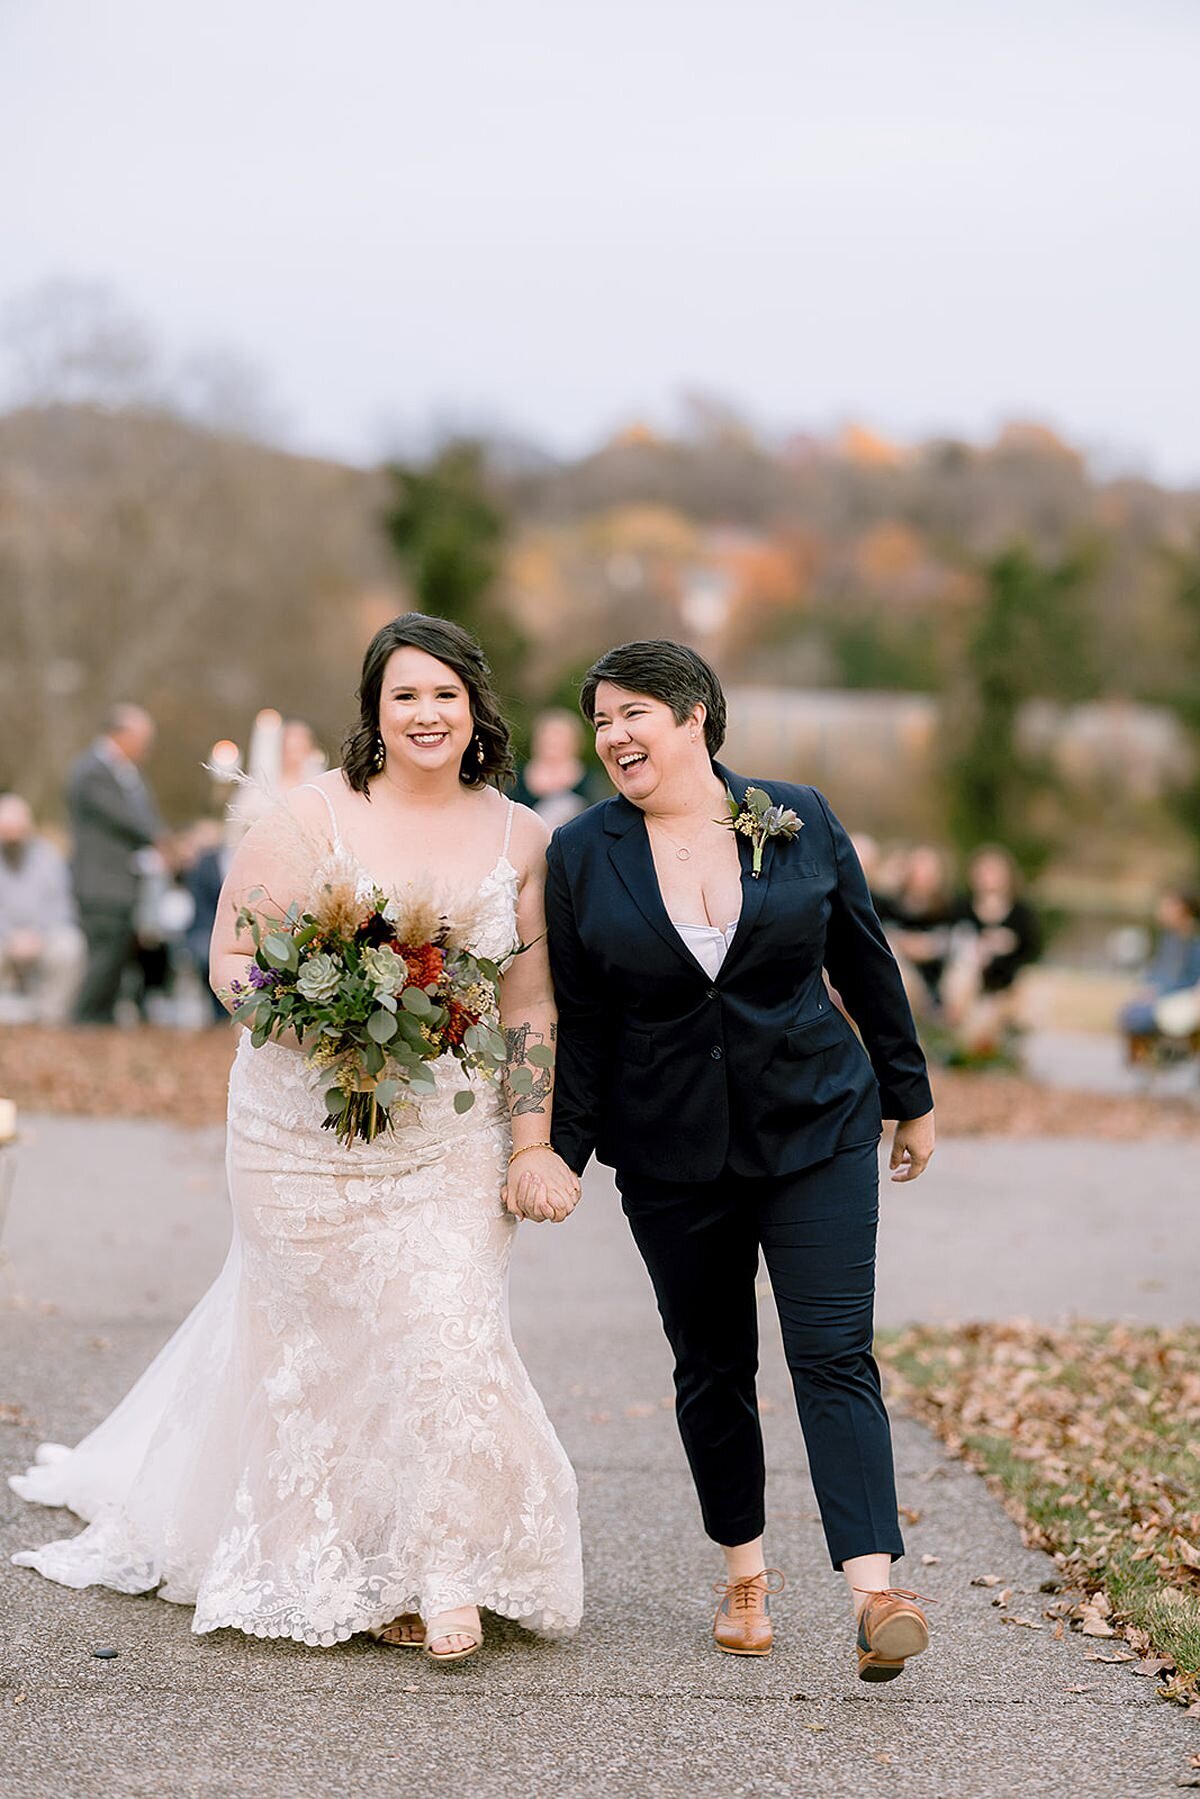 A bride wearing a white lace dress holding a bouquet of yellow, red and orange flowers walks hand in hand with her wife who is wearing a navy suit and small boutonniere of greenery